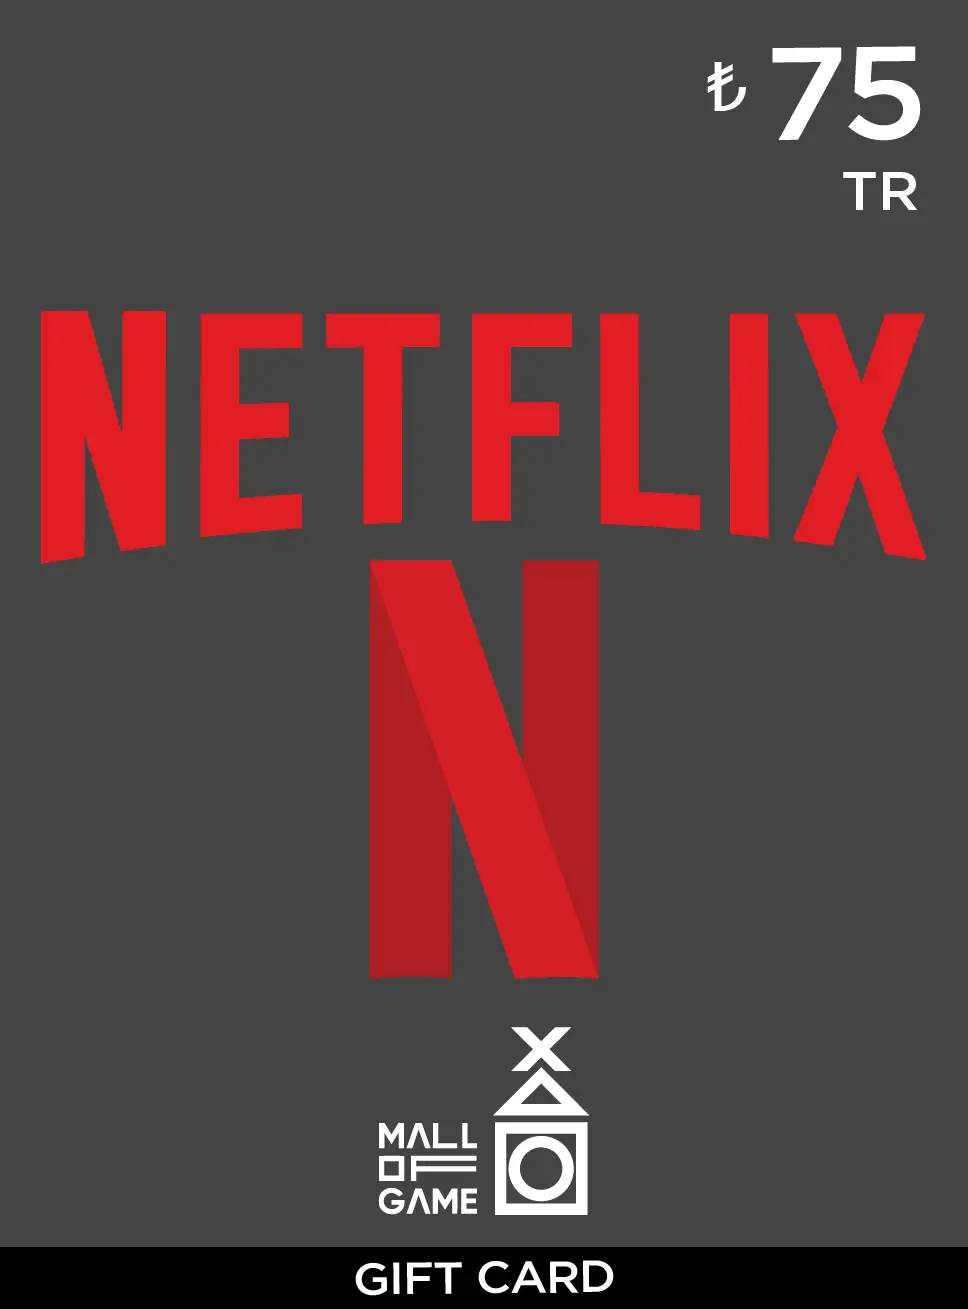 Netflix Gift Cards TRY75 (TR)